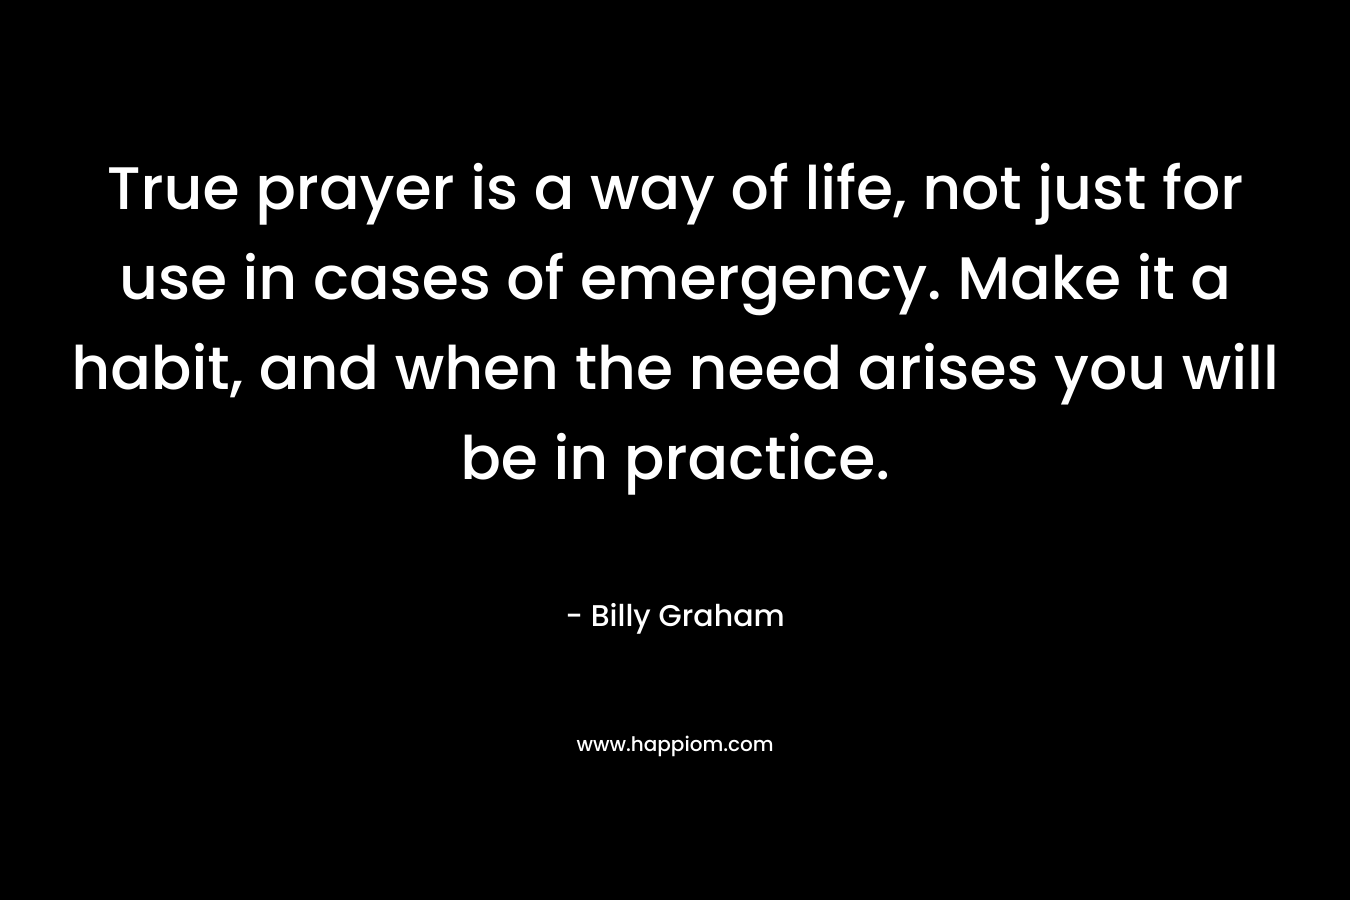 True prayer is a way of life, not just for use in cases of emergency. Make it a habit, and when the need arises you will be in practice. – Billy Graham